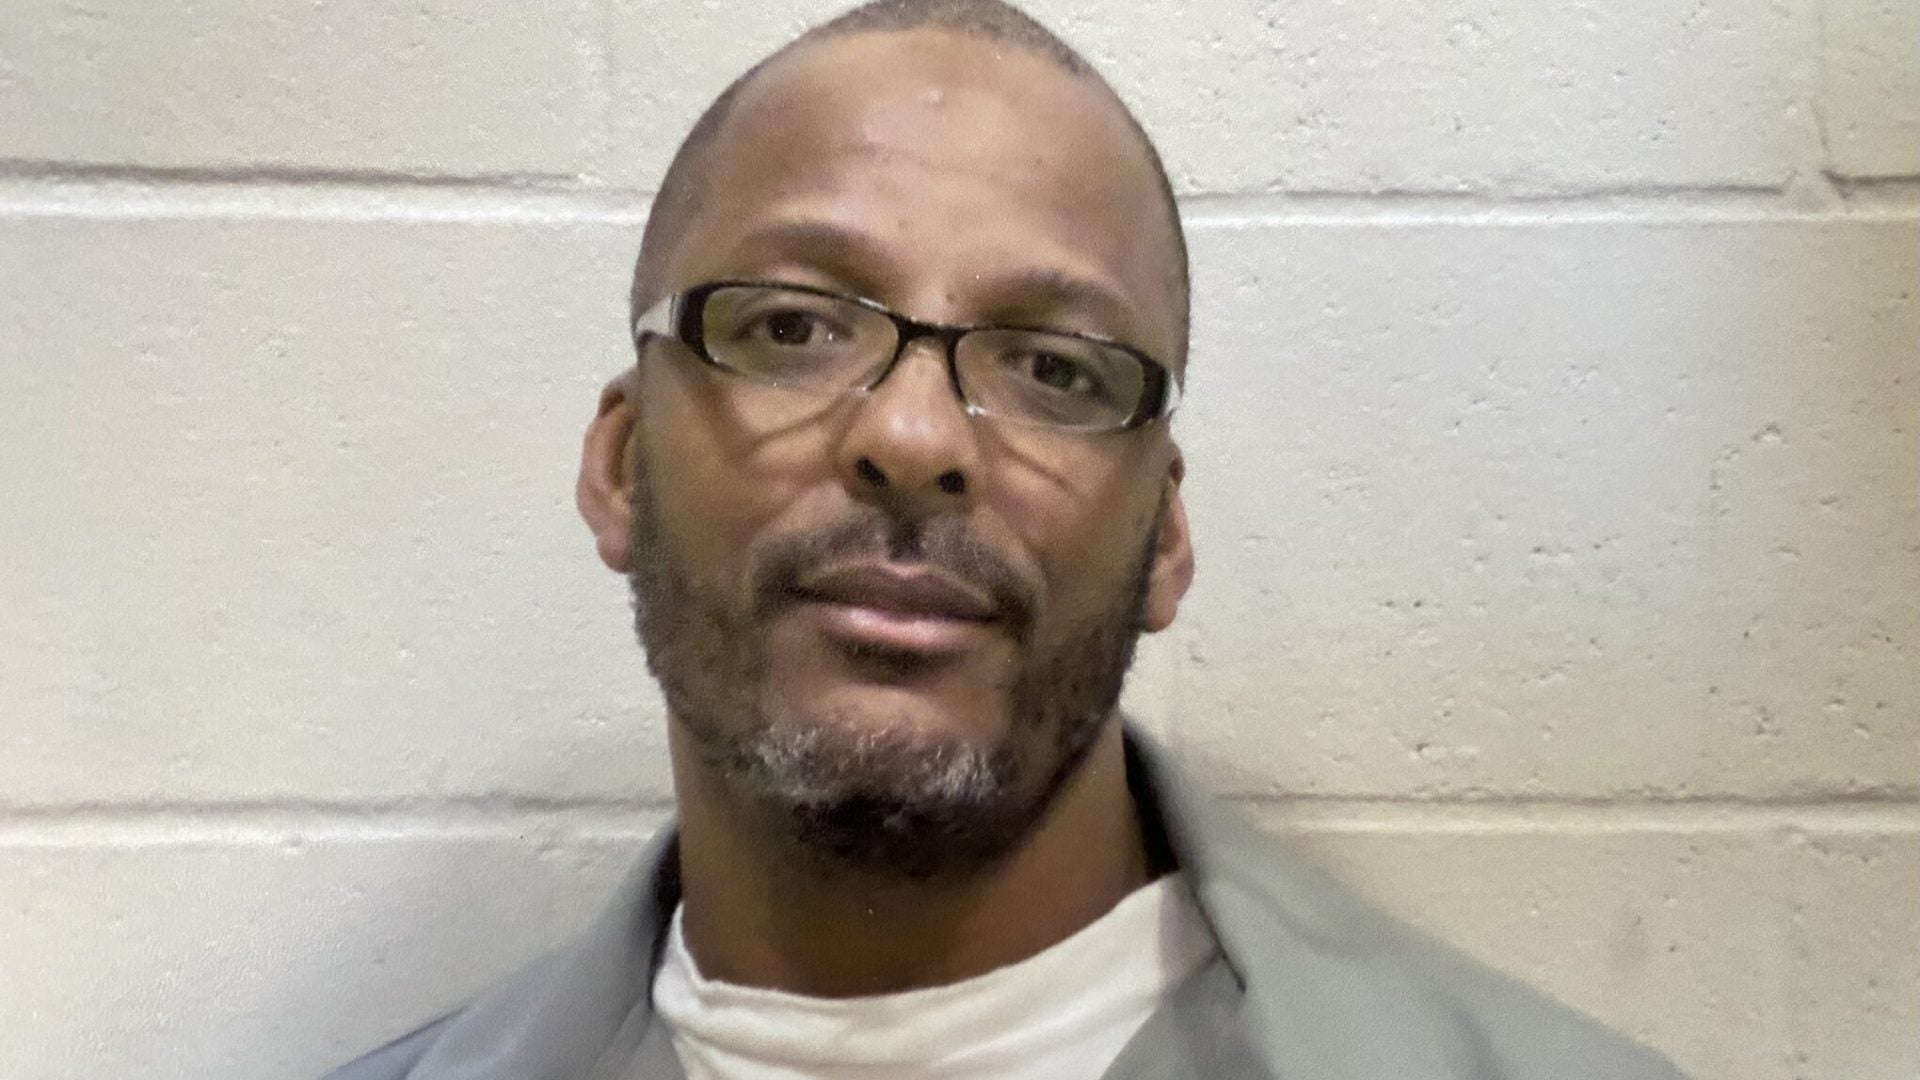 A Missouri Man's Murder Conviction Was Overturned After Over 30 Years. Now, The State Supreme Court Has Halted His Release